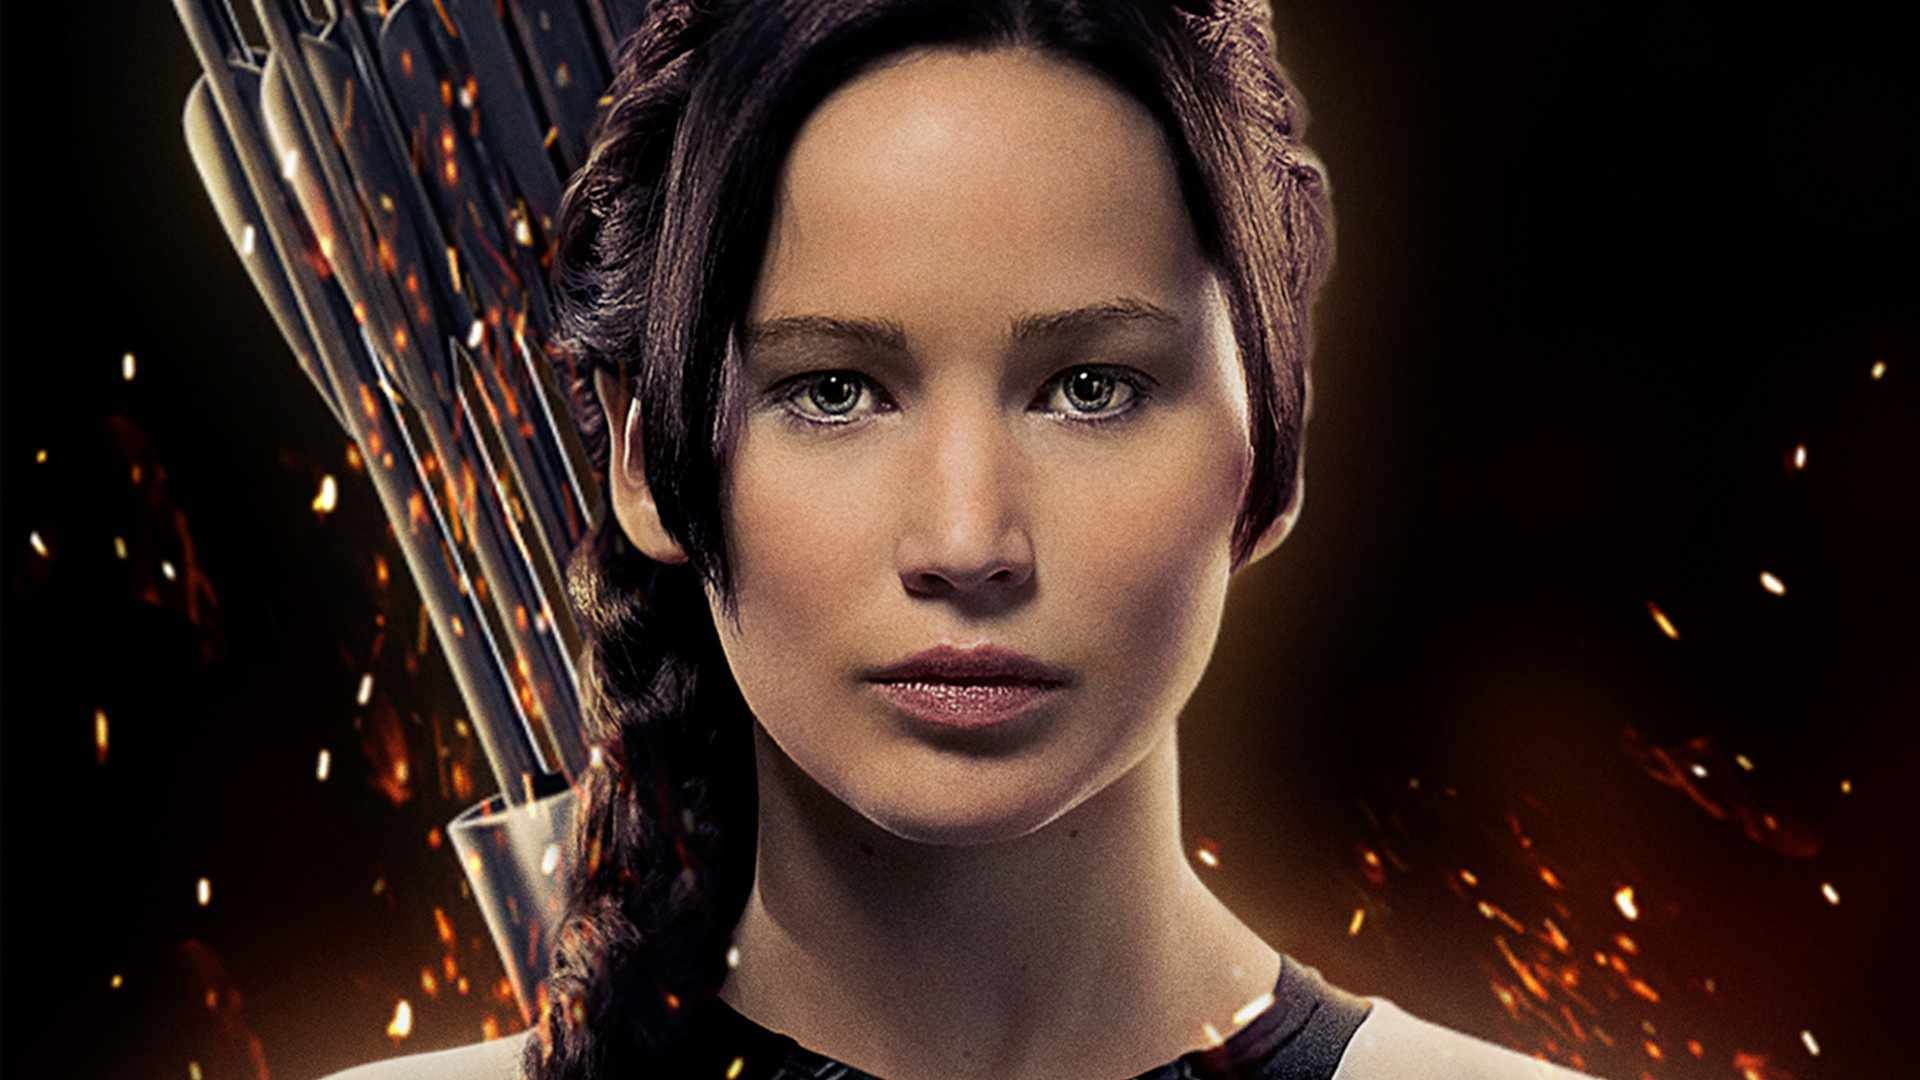 1920x1080 WATCH: The Hunger Games "Mockingjay Part 2" Trailer